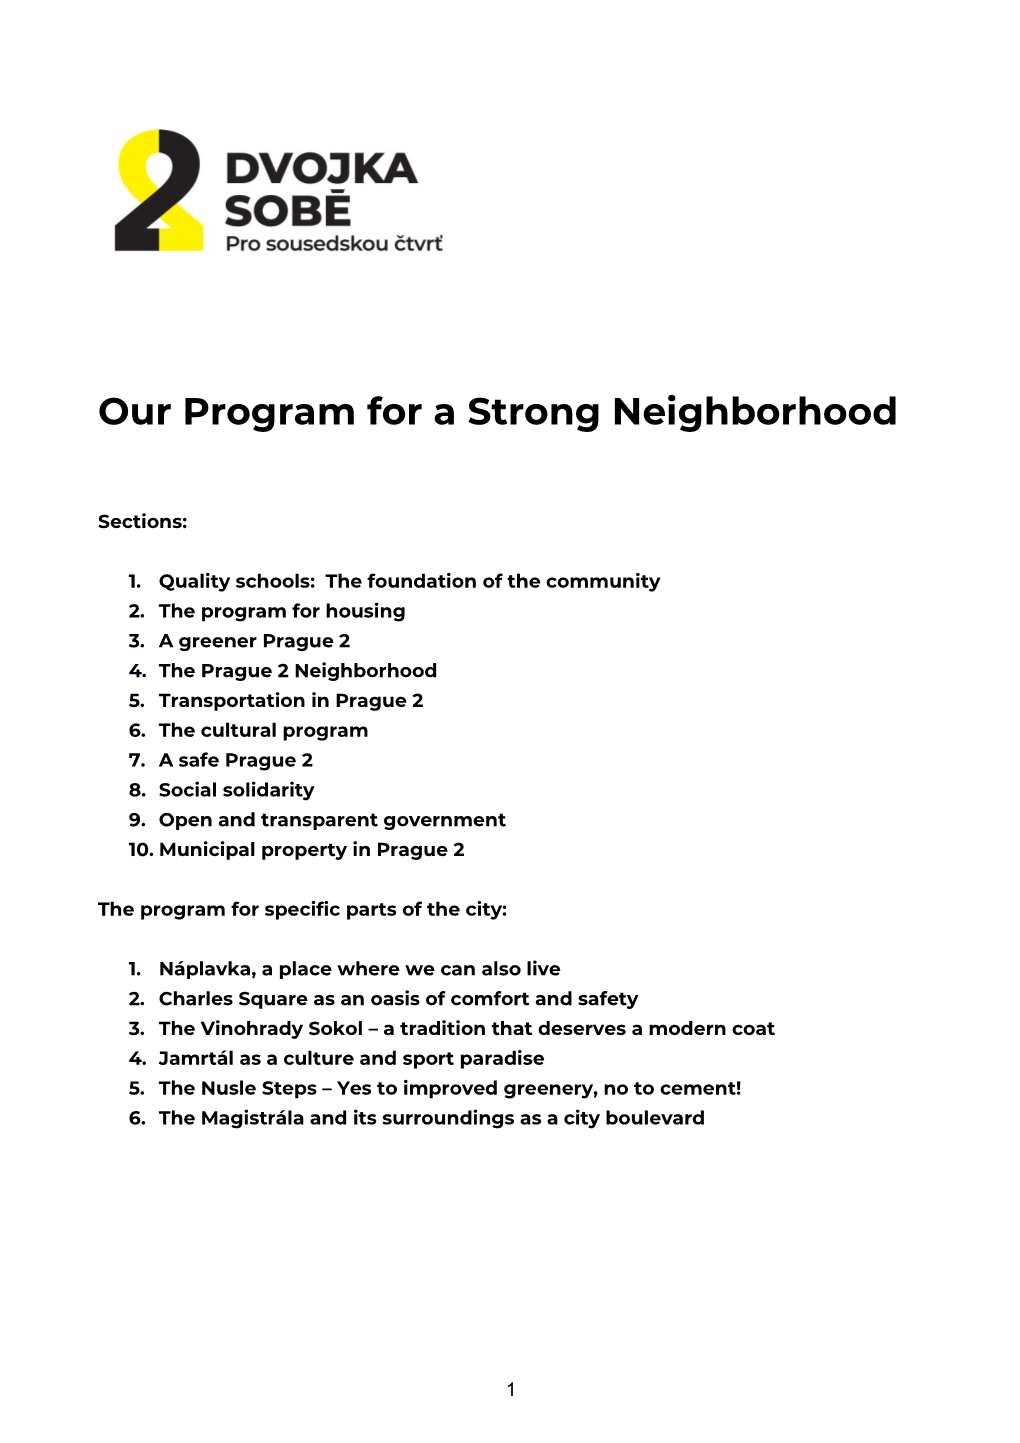 Our Program for a Strong Neighborhood